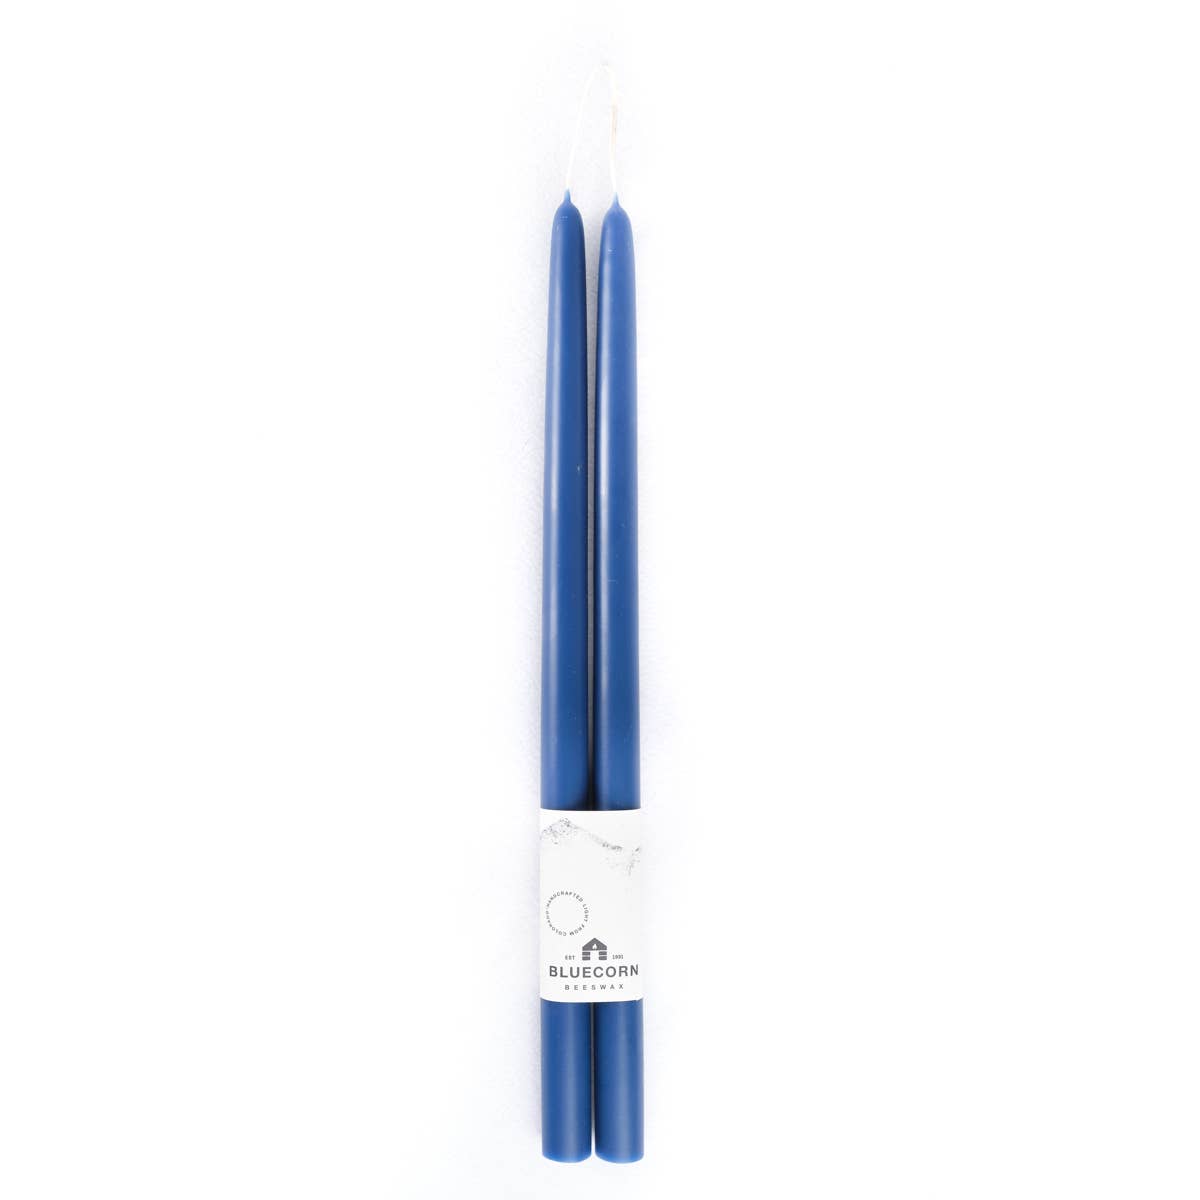 Pair of Hand-Dipped Beeswax Taper Candles